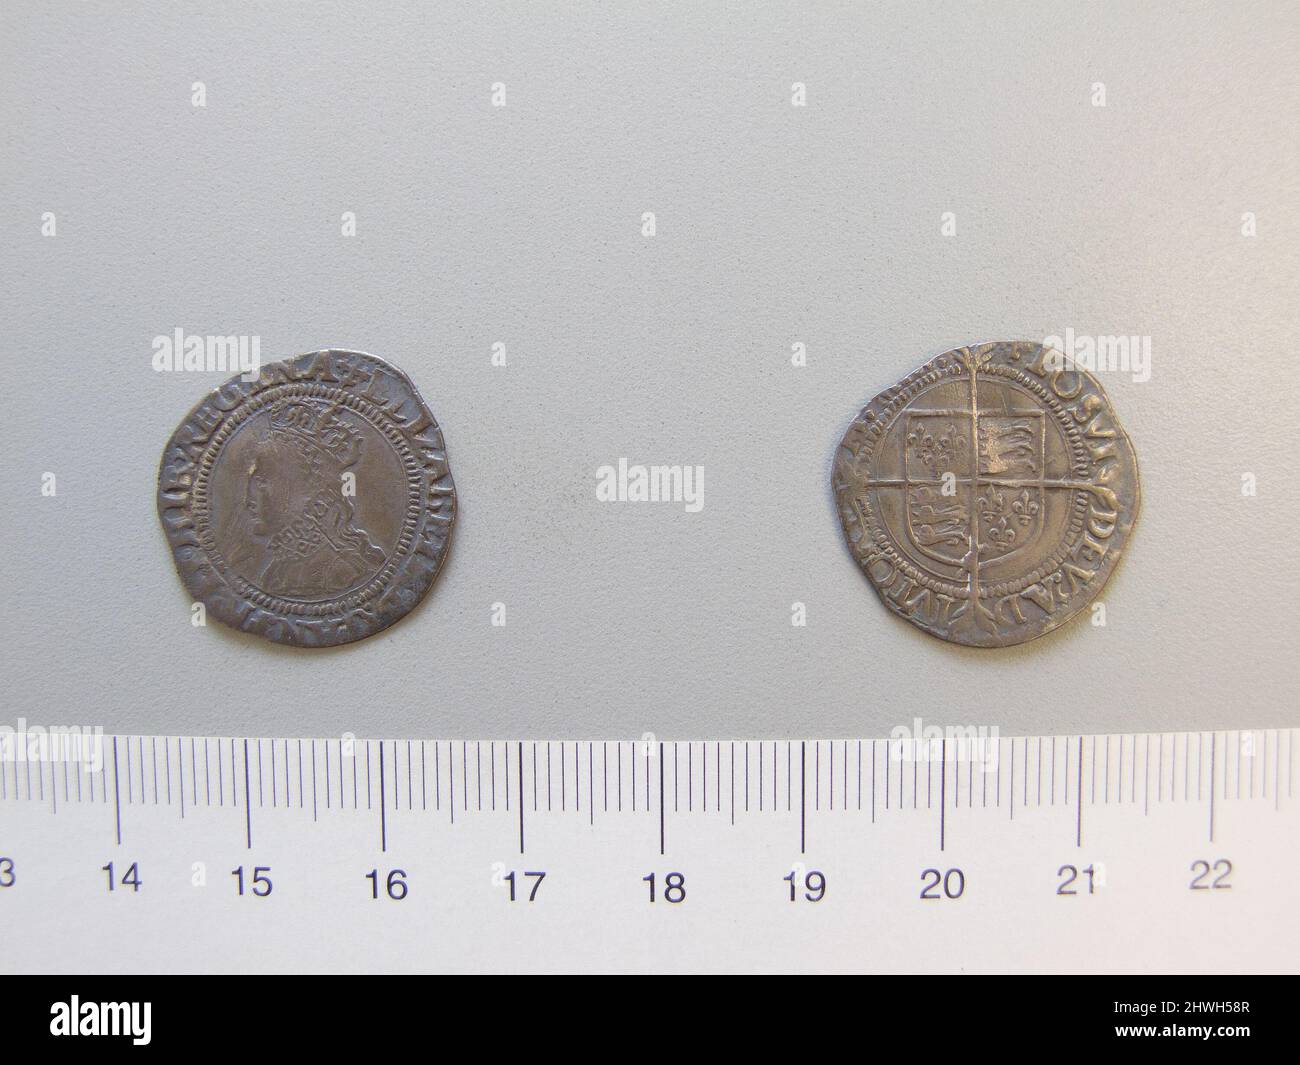 1 Groat of Elizabeth I, Queen of England from London. Ruler: Elizabeth I, Queen of England, British, 1533–1603, ruled 1558–1603 Mint: London Artist: Unknown Stock Photo